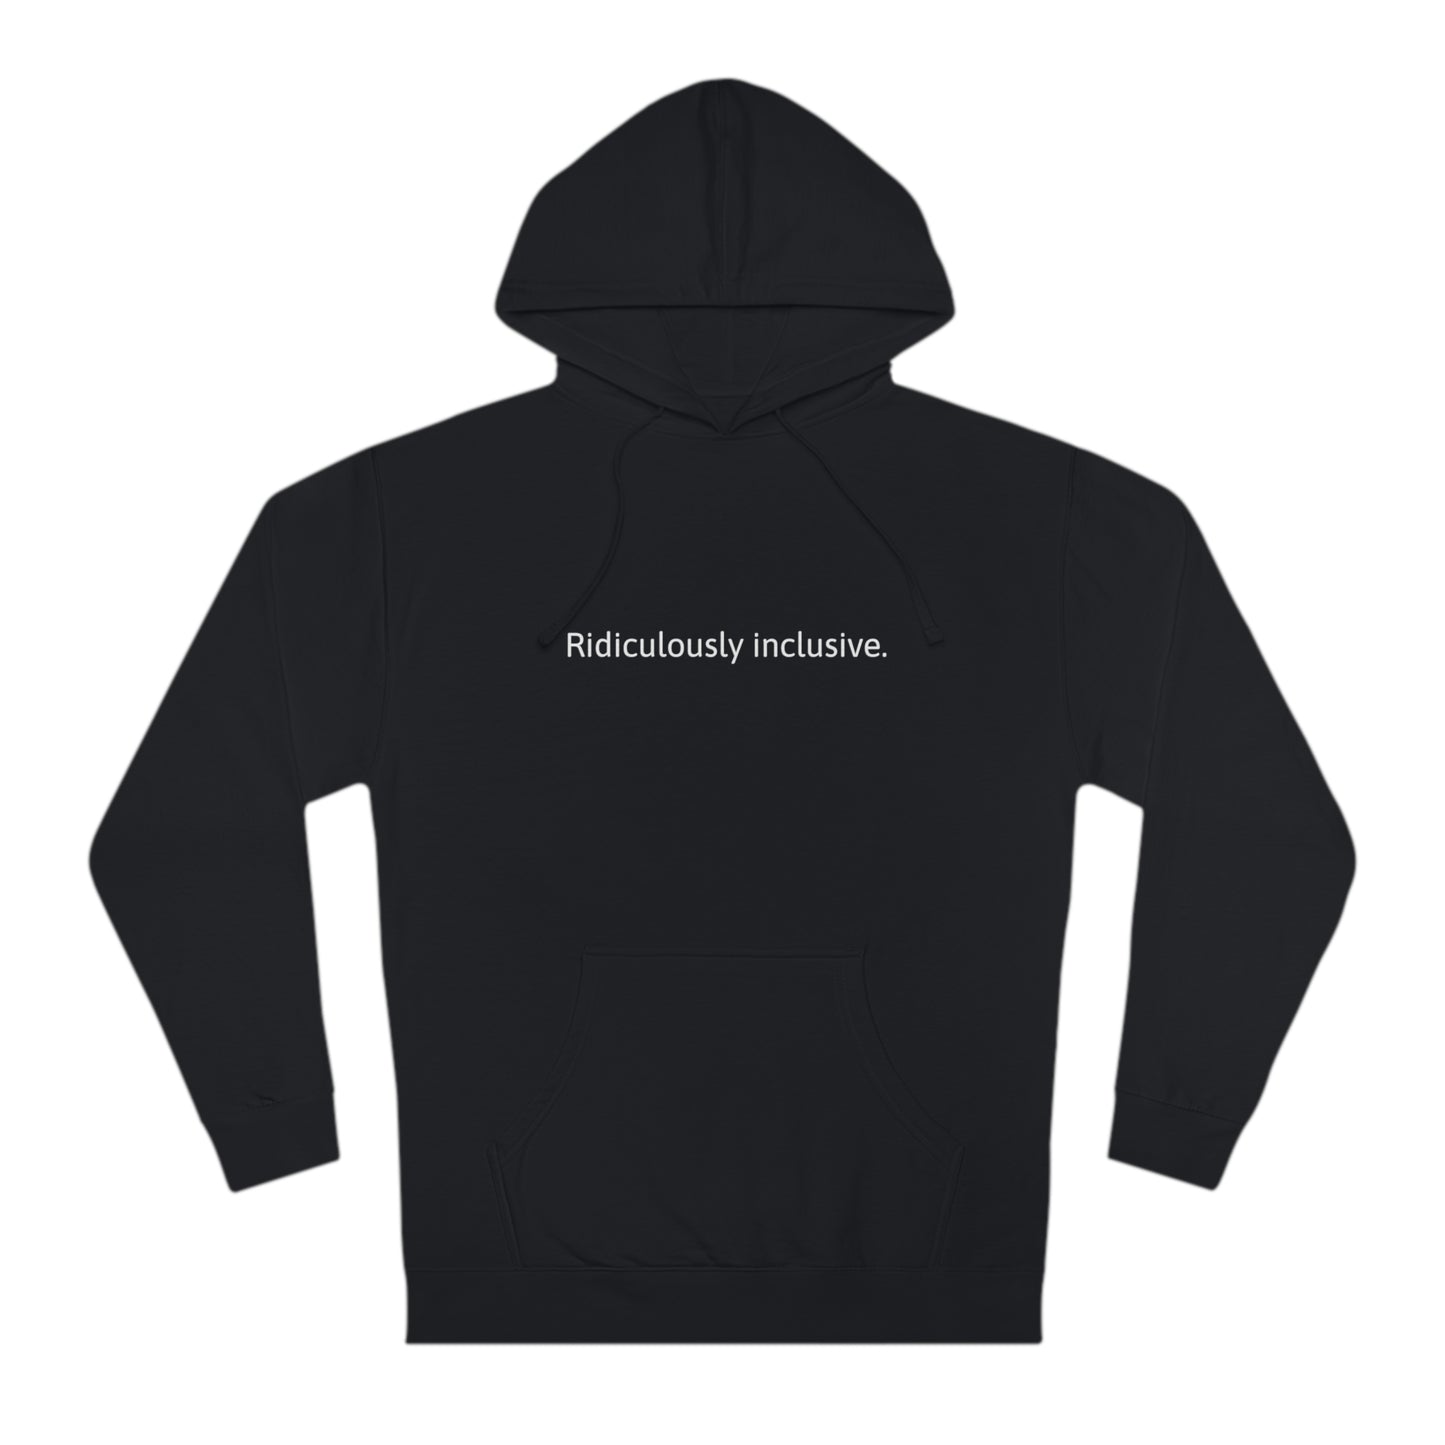 Ridiculously inclusive. Hoodie